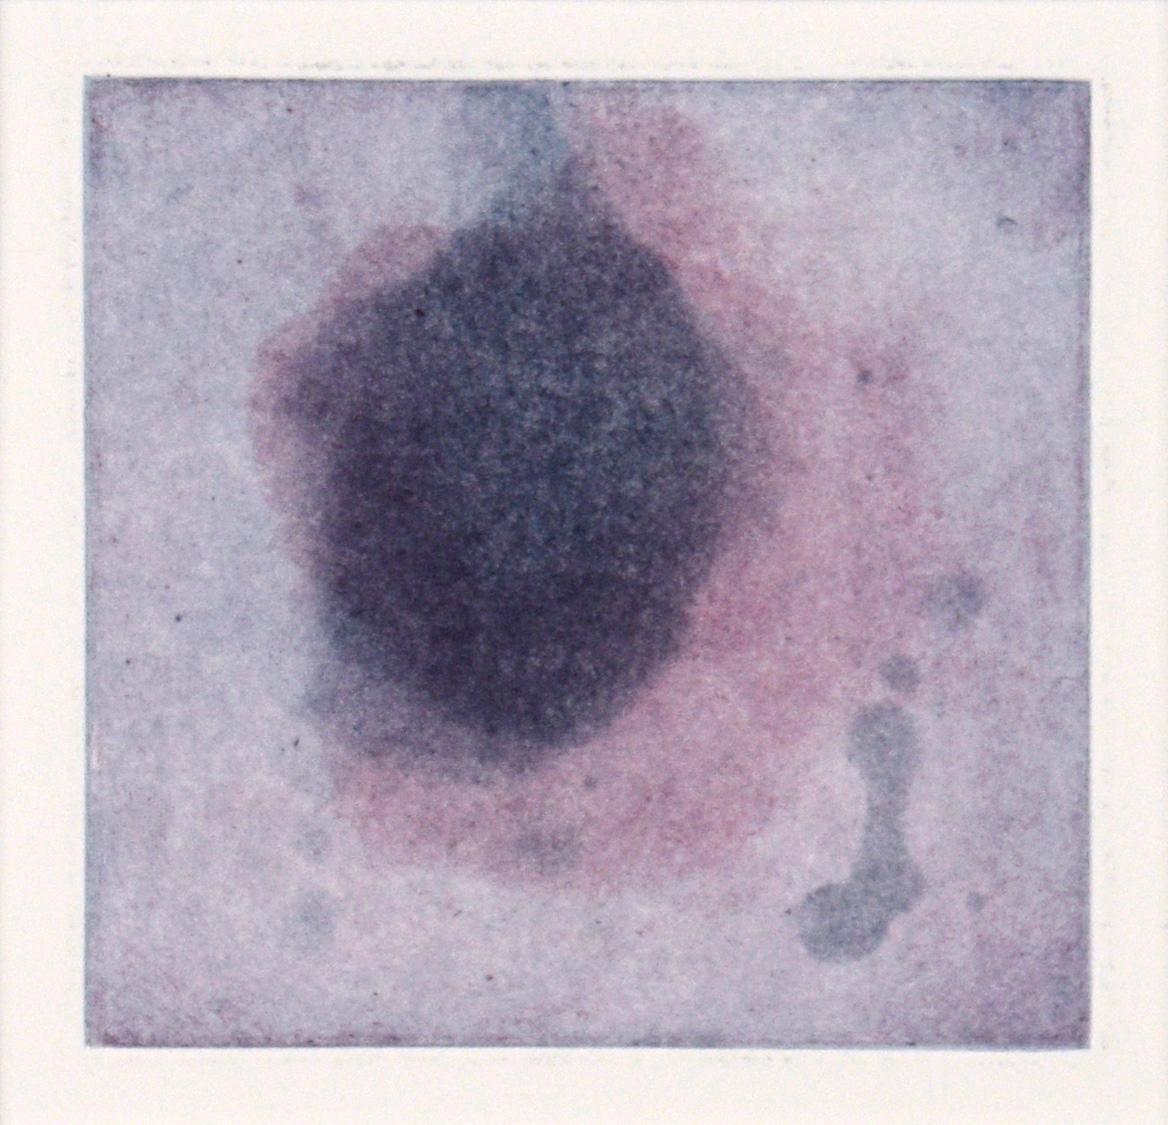 Lavender Nebula - Transfer Monotype in Oil on Paper - Print by Heather Speck